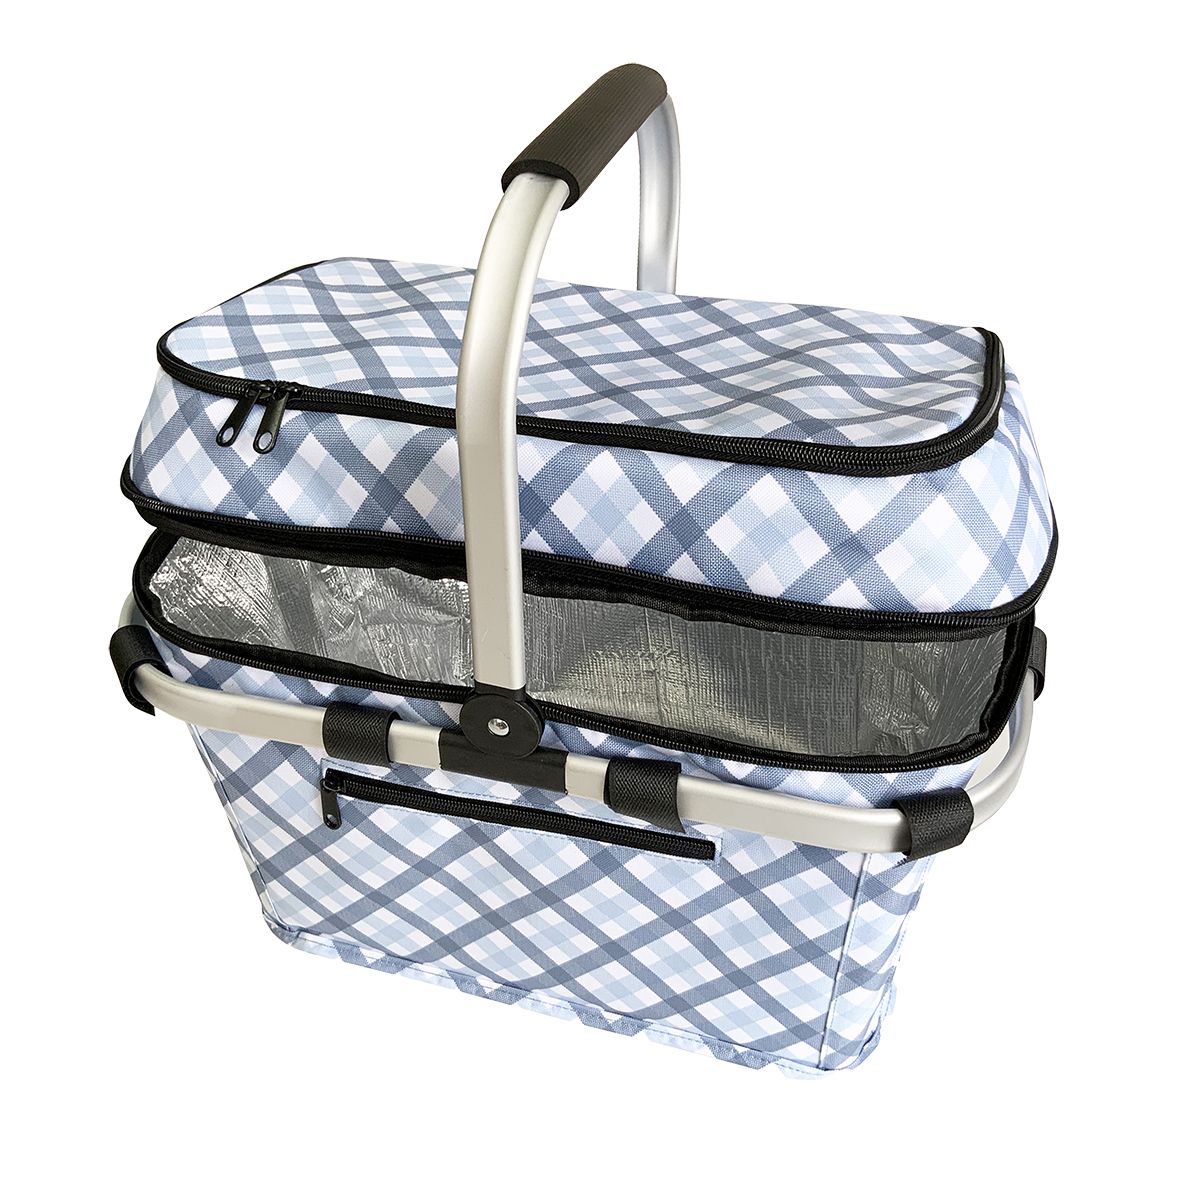 4 Person Insulated Picnic Basket Gingham